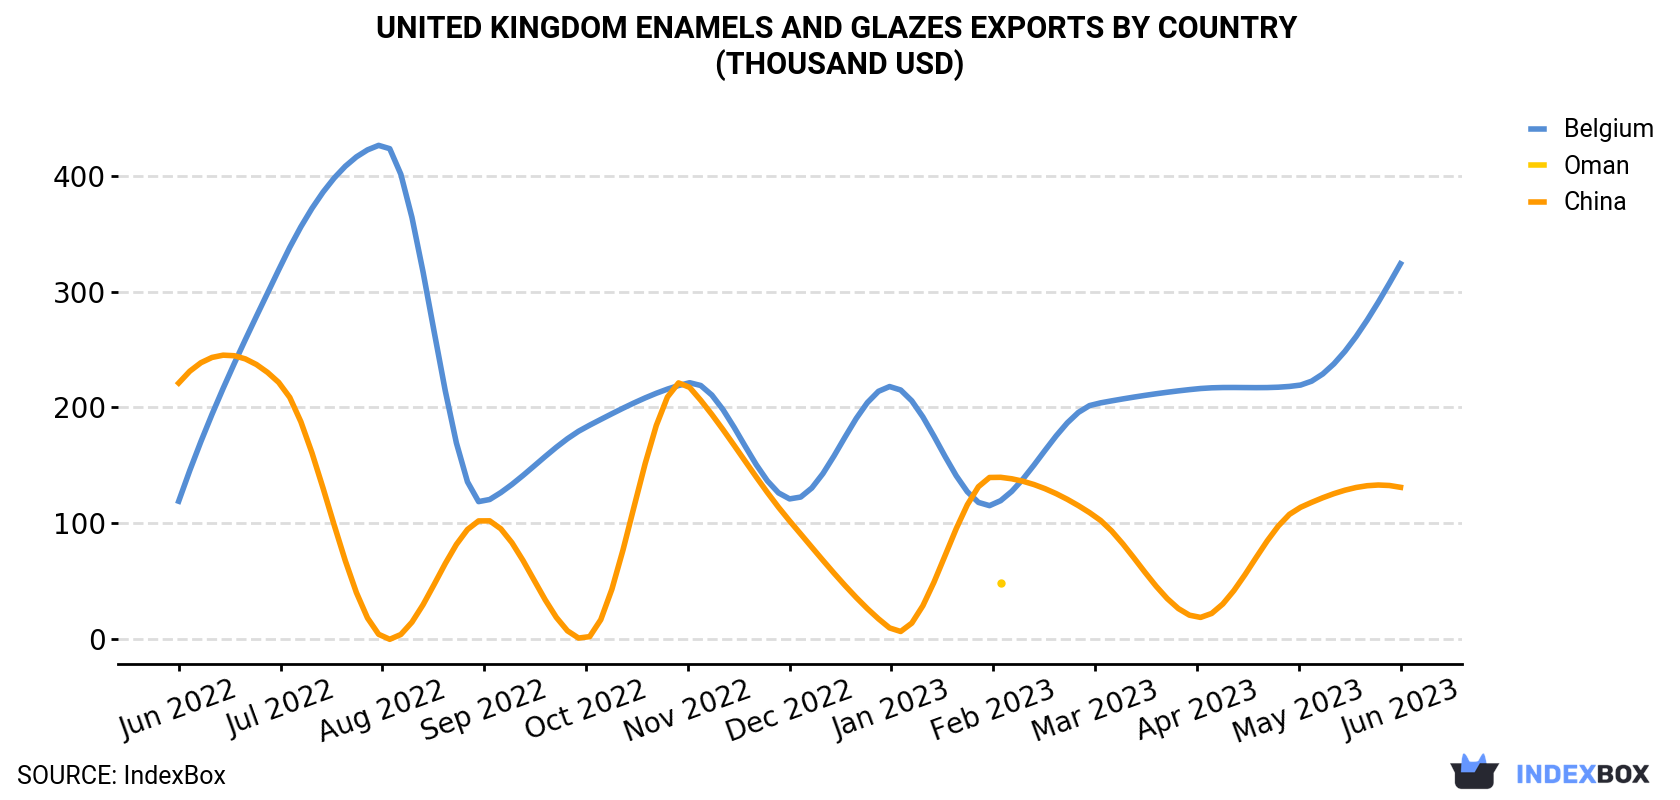 United Kingdom Enamels And Glazes Exports By Country (Thousand USD)